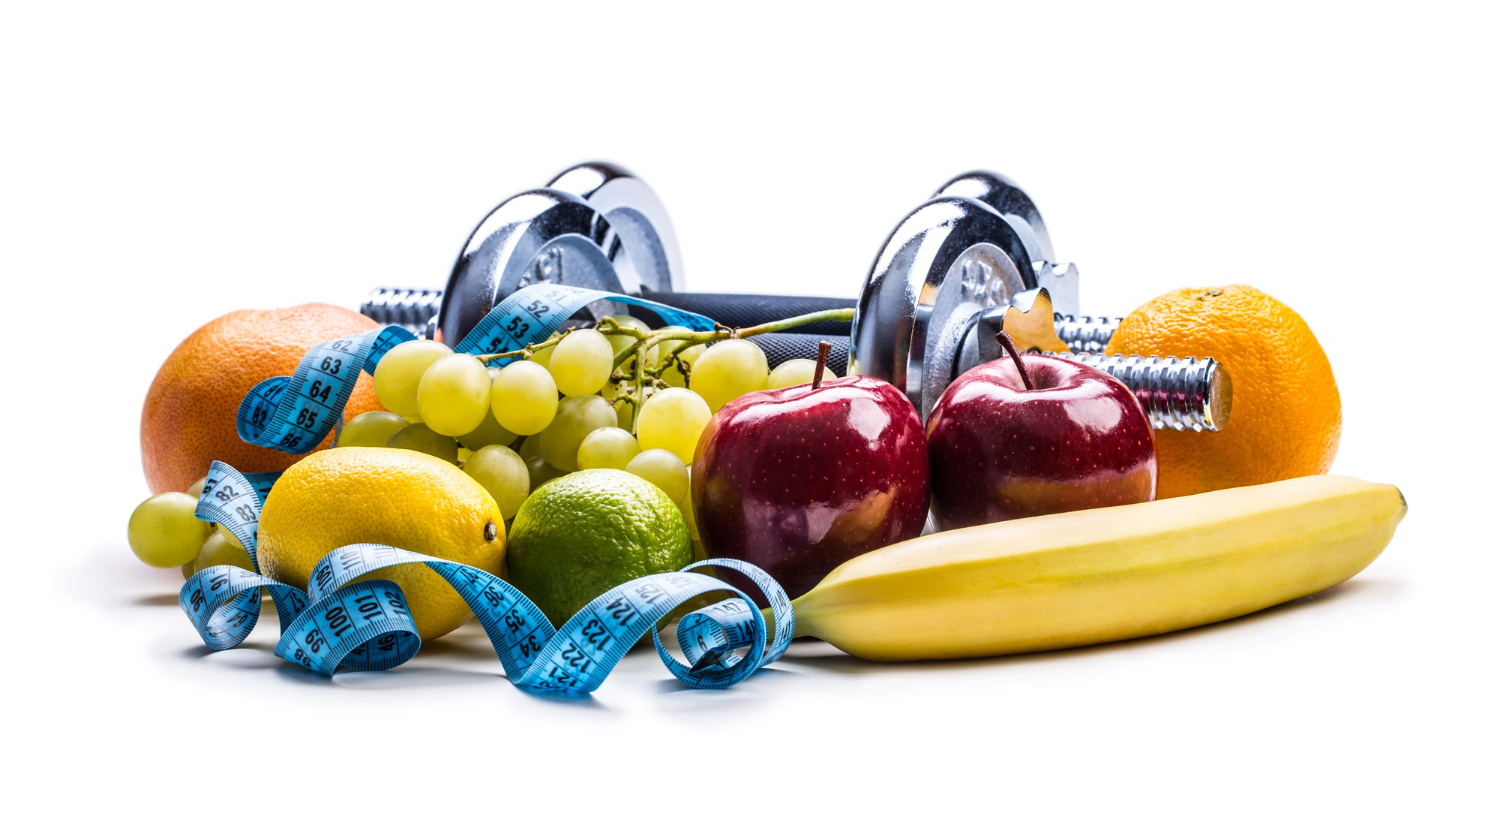 chrome dumbbells surrounded with healthy fruits and measuring tape